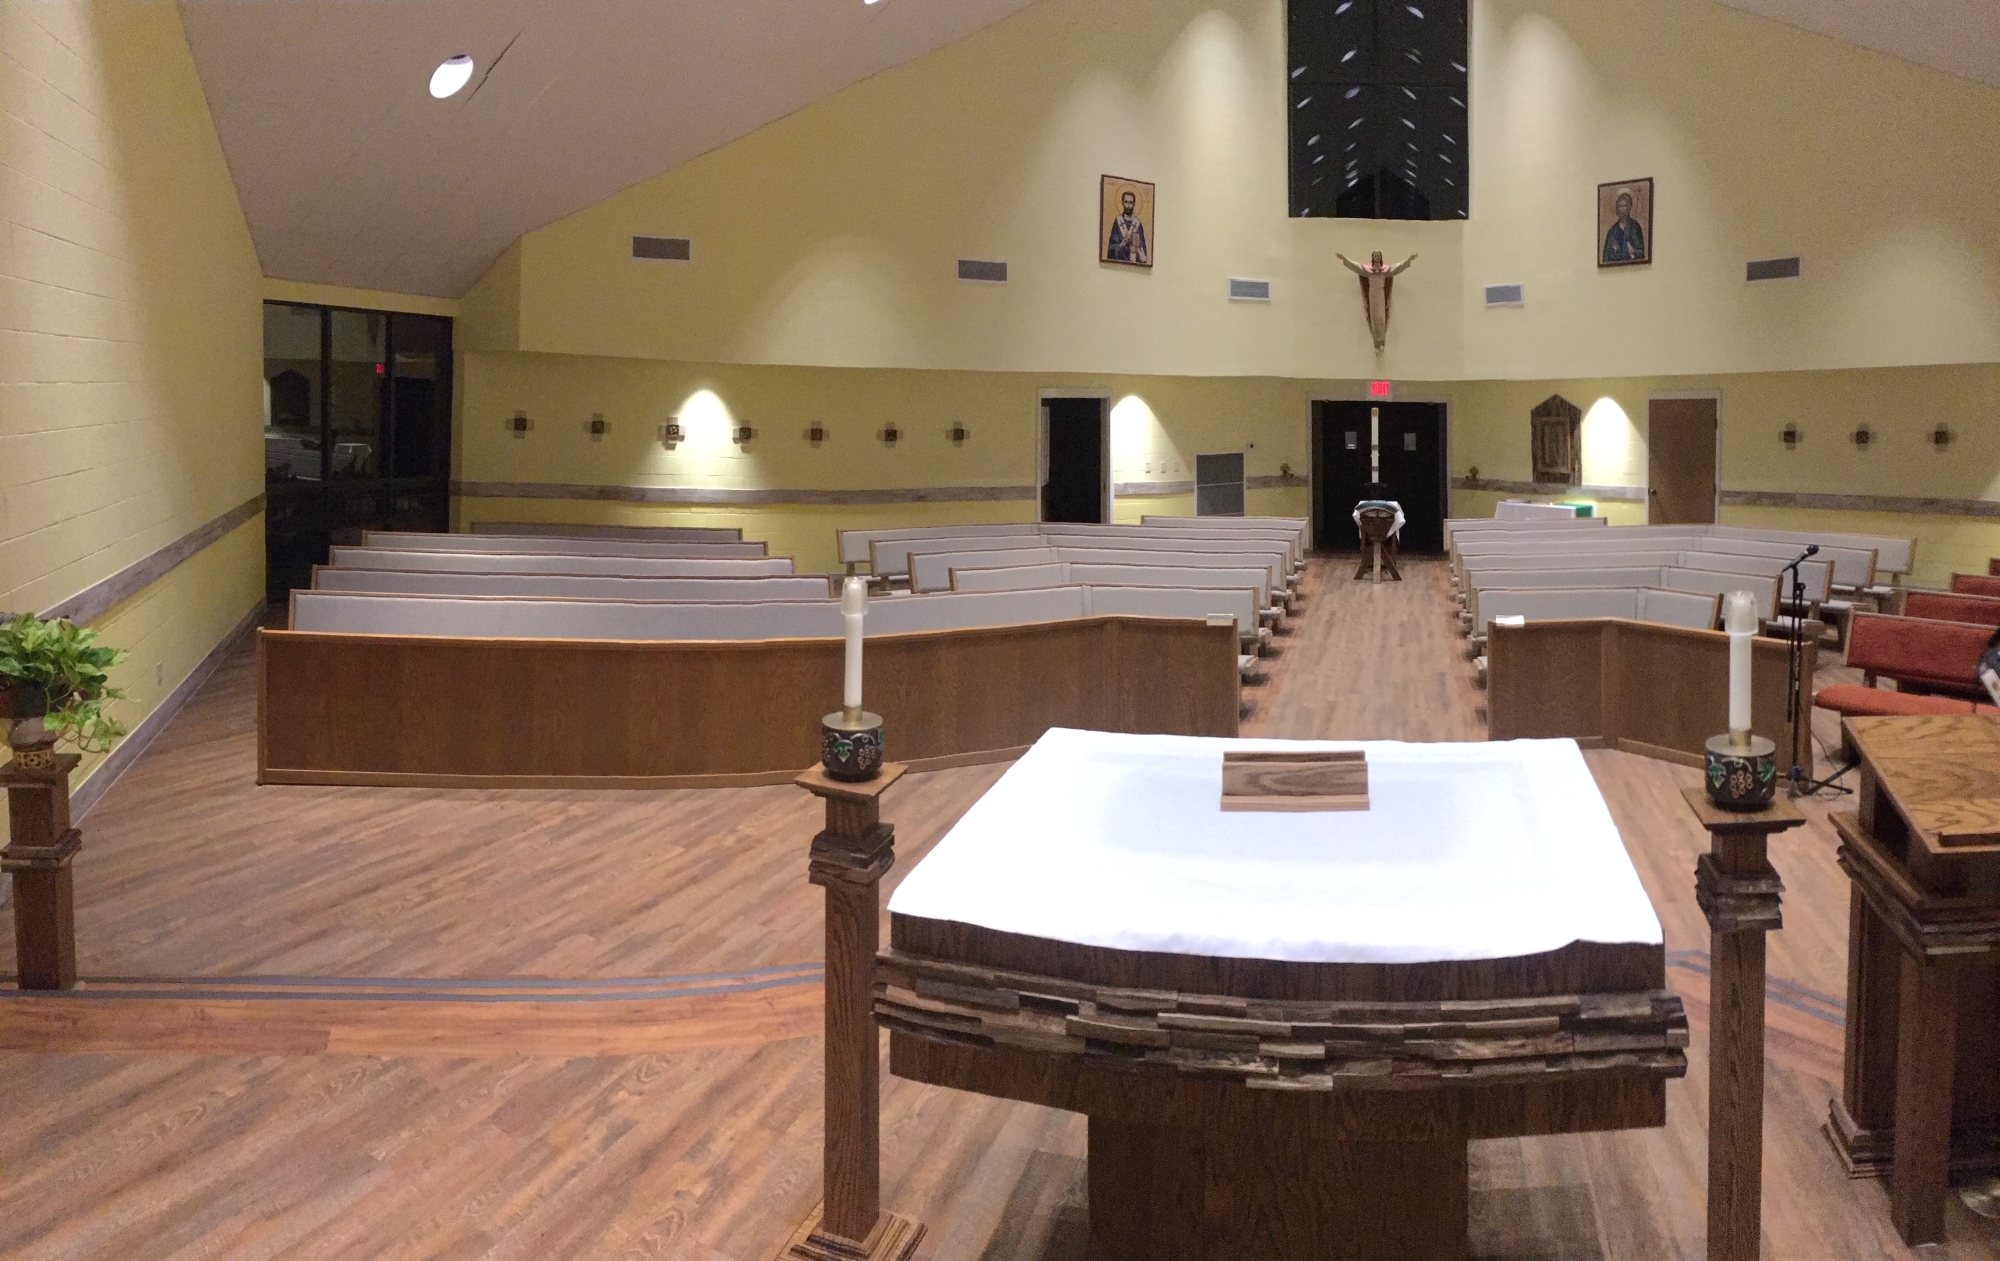 Pew upholstery completed at St. Gregory the Great Catholic in Senatobia, Mississippi by Woods Church Interiors - 8